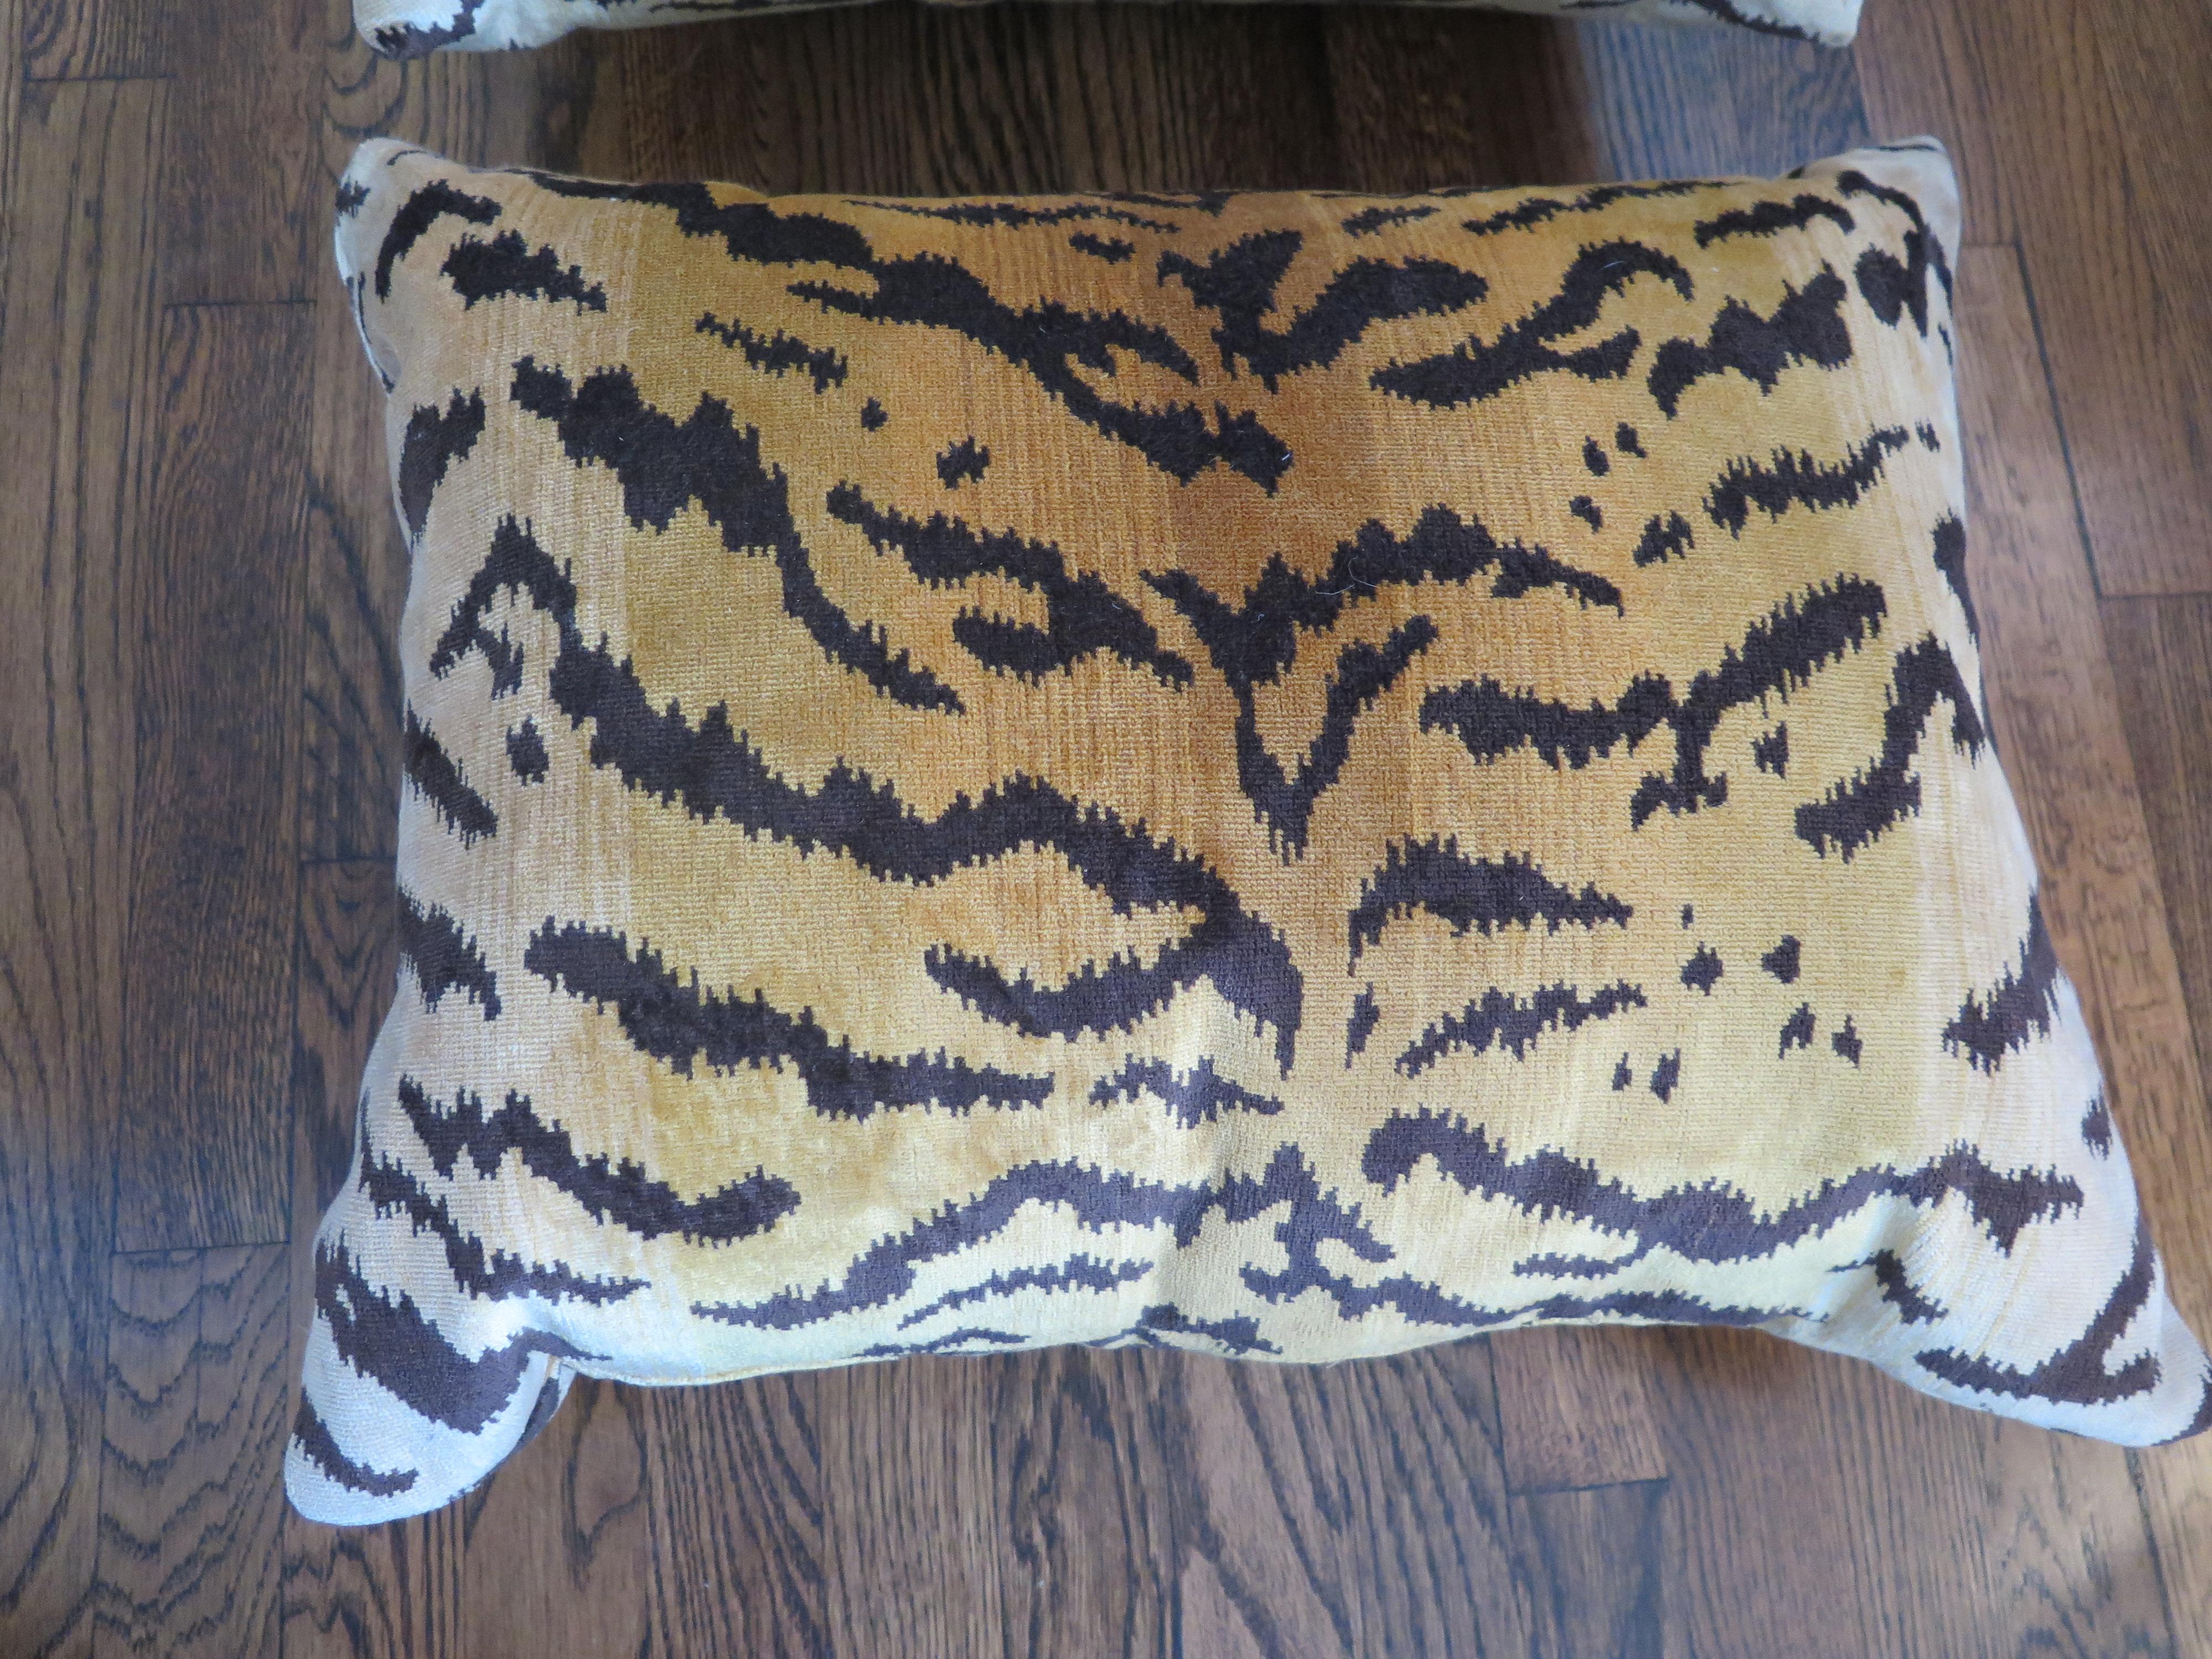 Scalamandré Le Tigre silk velvet pillows made to order custom pillows. The price listed is per pillow. We currently have the pair in the picture available, but we can make more in a 4-6 week lead time. We can make any size or with any edge detail or